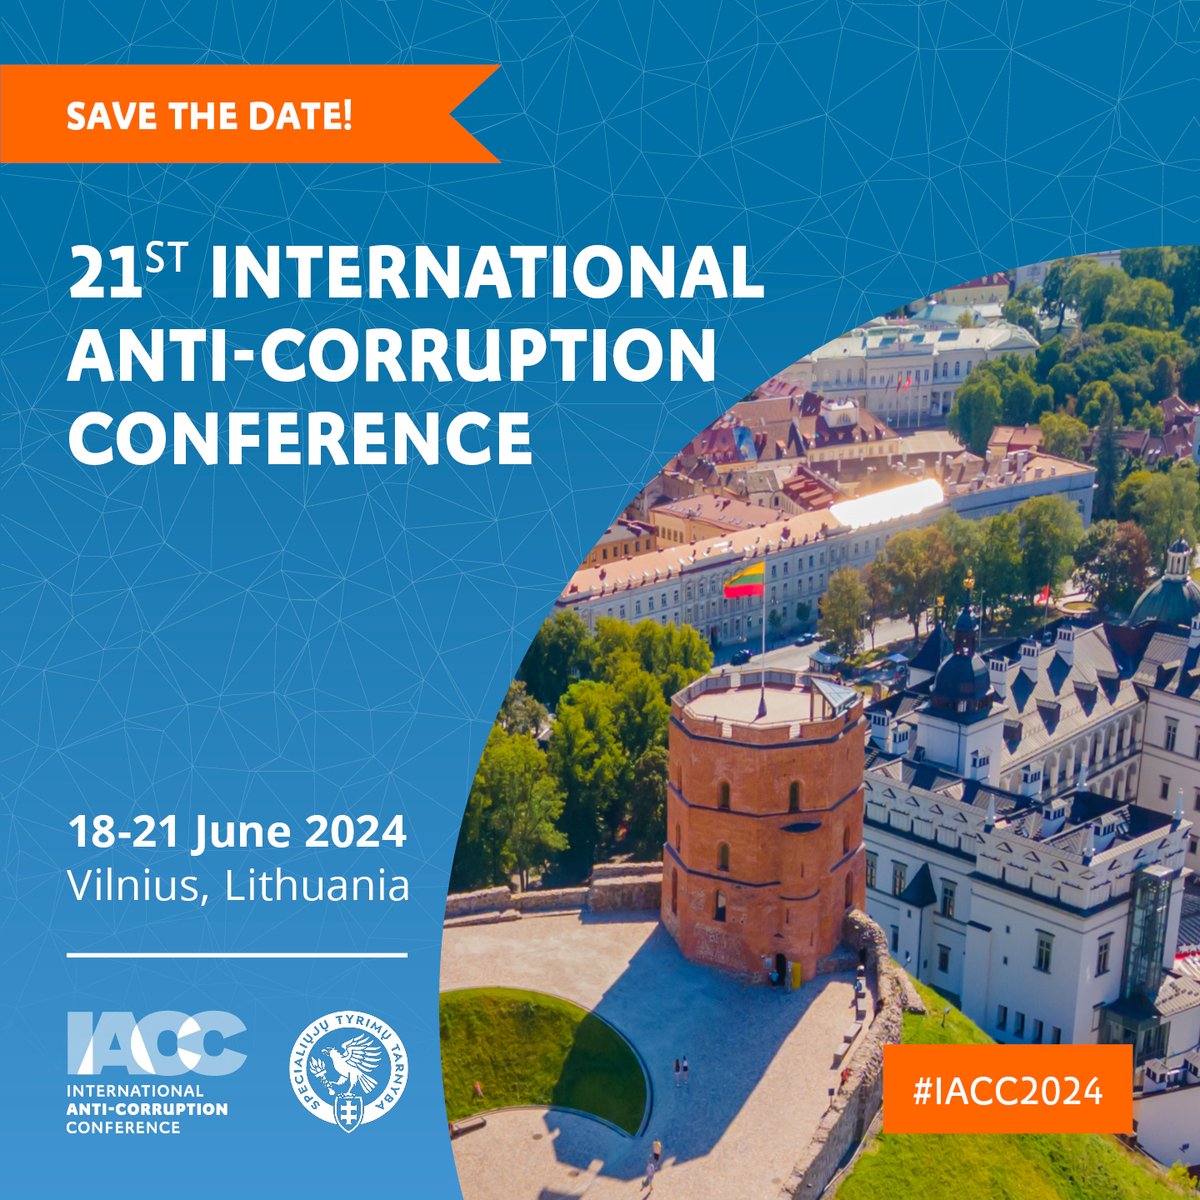 🇱🇹 Lithuania will host the International Anti-Corruption Conference 2024, the world’s largest independent global forum in the fight against corruption. The #IACC2024 will take place from 18 to 21 June 2024 in Vilnius. Save the date! More info: iaccseries.org/iacc-2024/